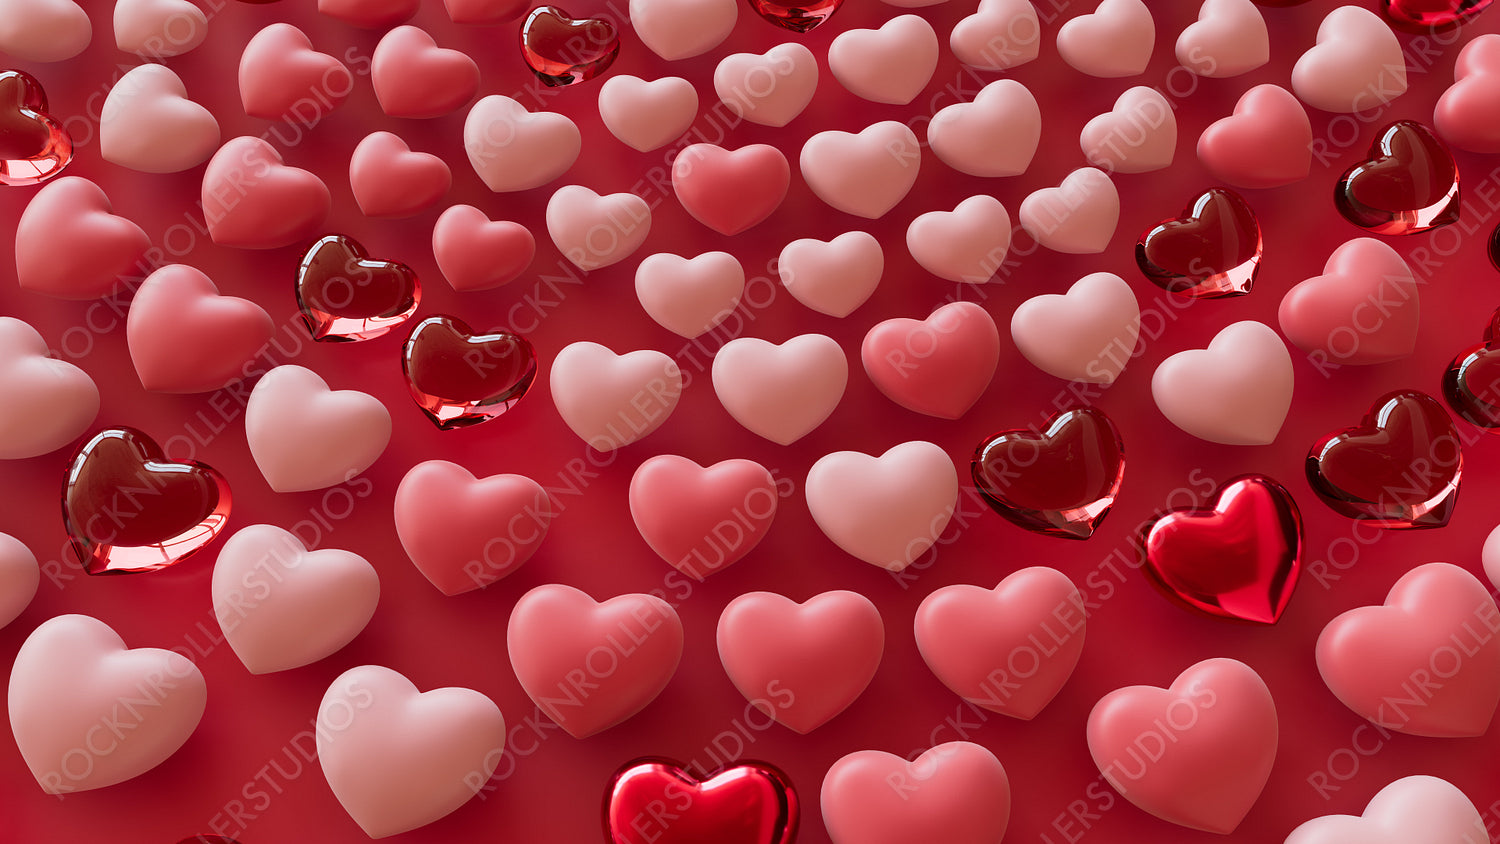 Pink, Red Metallic and Red Glass 3D Hearts arranged in the Shape of a Spiral. Contemporary Valentine's Day Background. 3D Render.